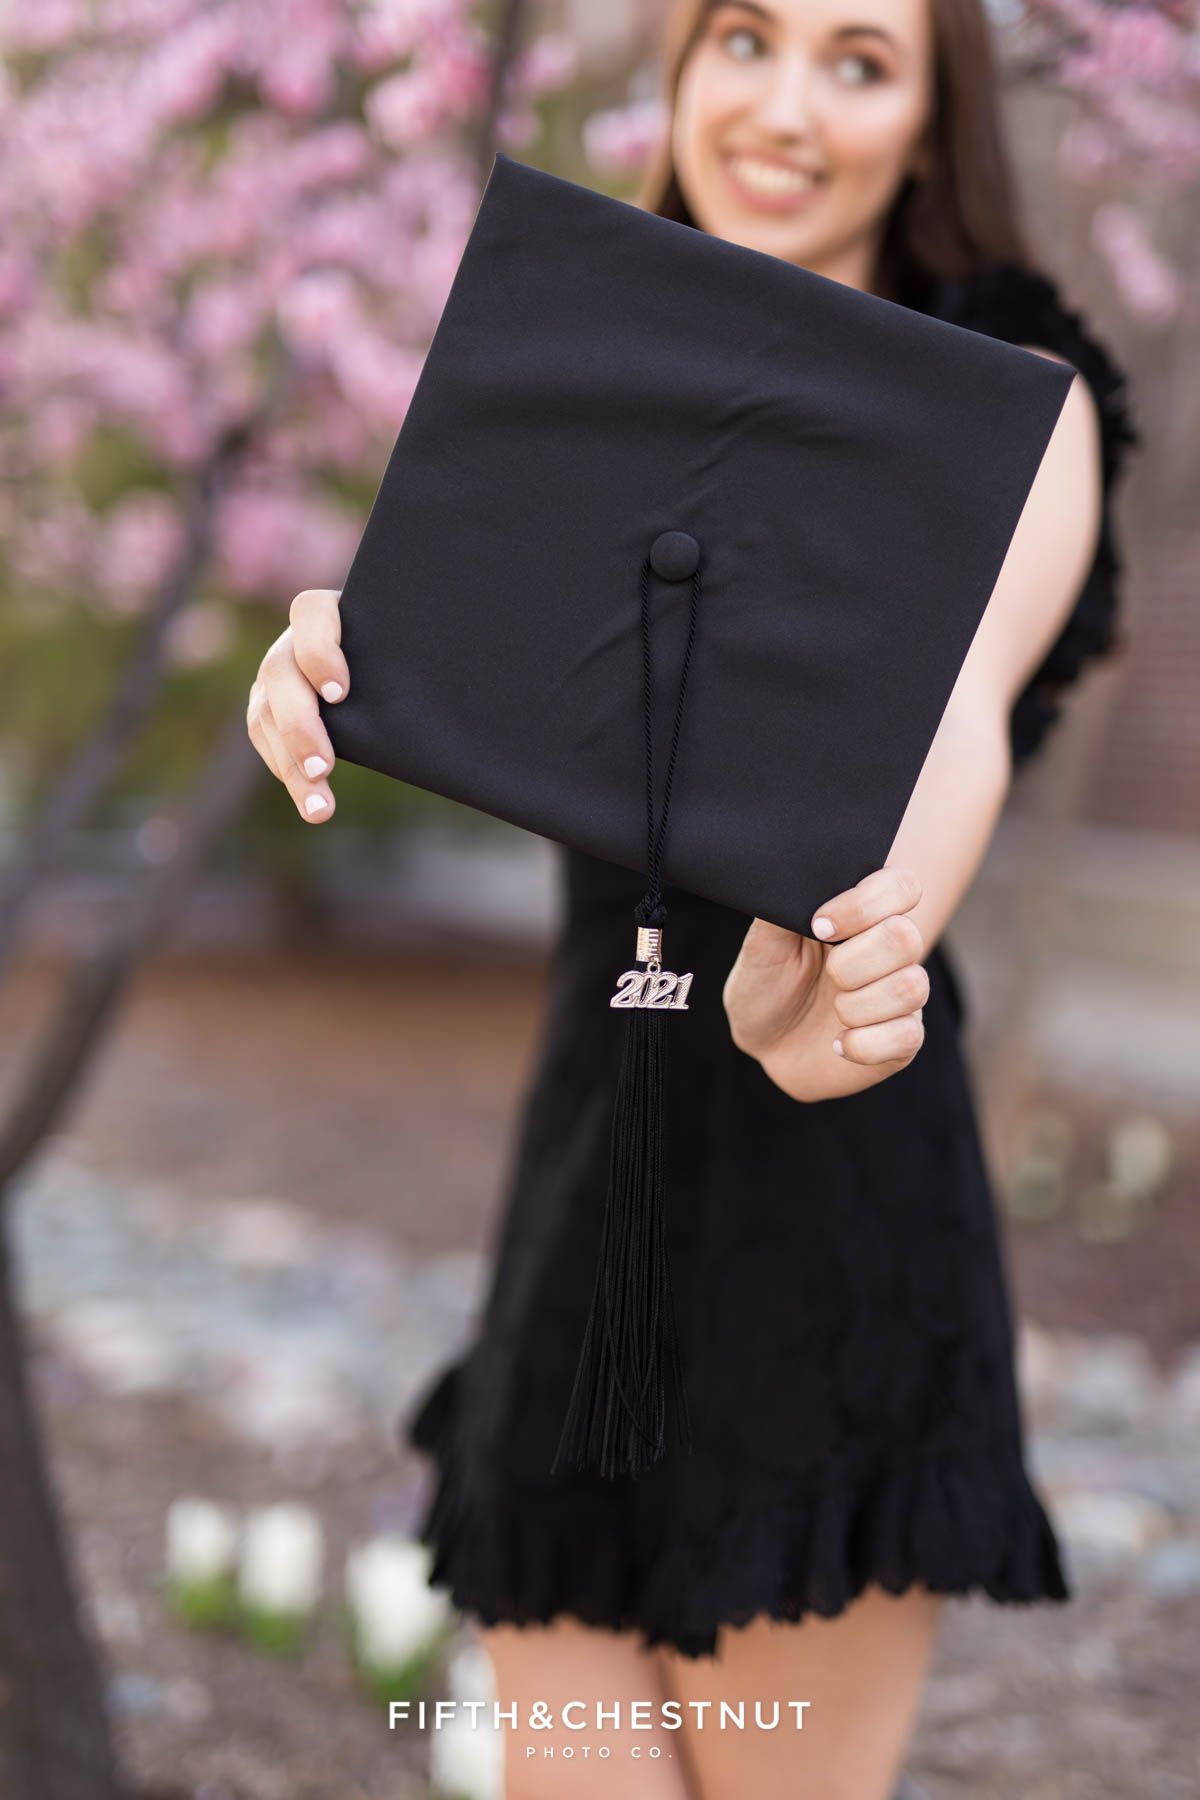 A UNR graduate holds her cap towards the camera to show off her 2021 tassel in front of an ornamental blossoming plum tree